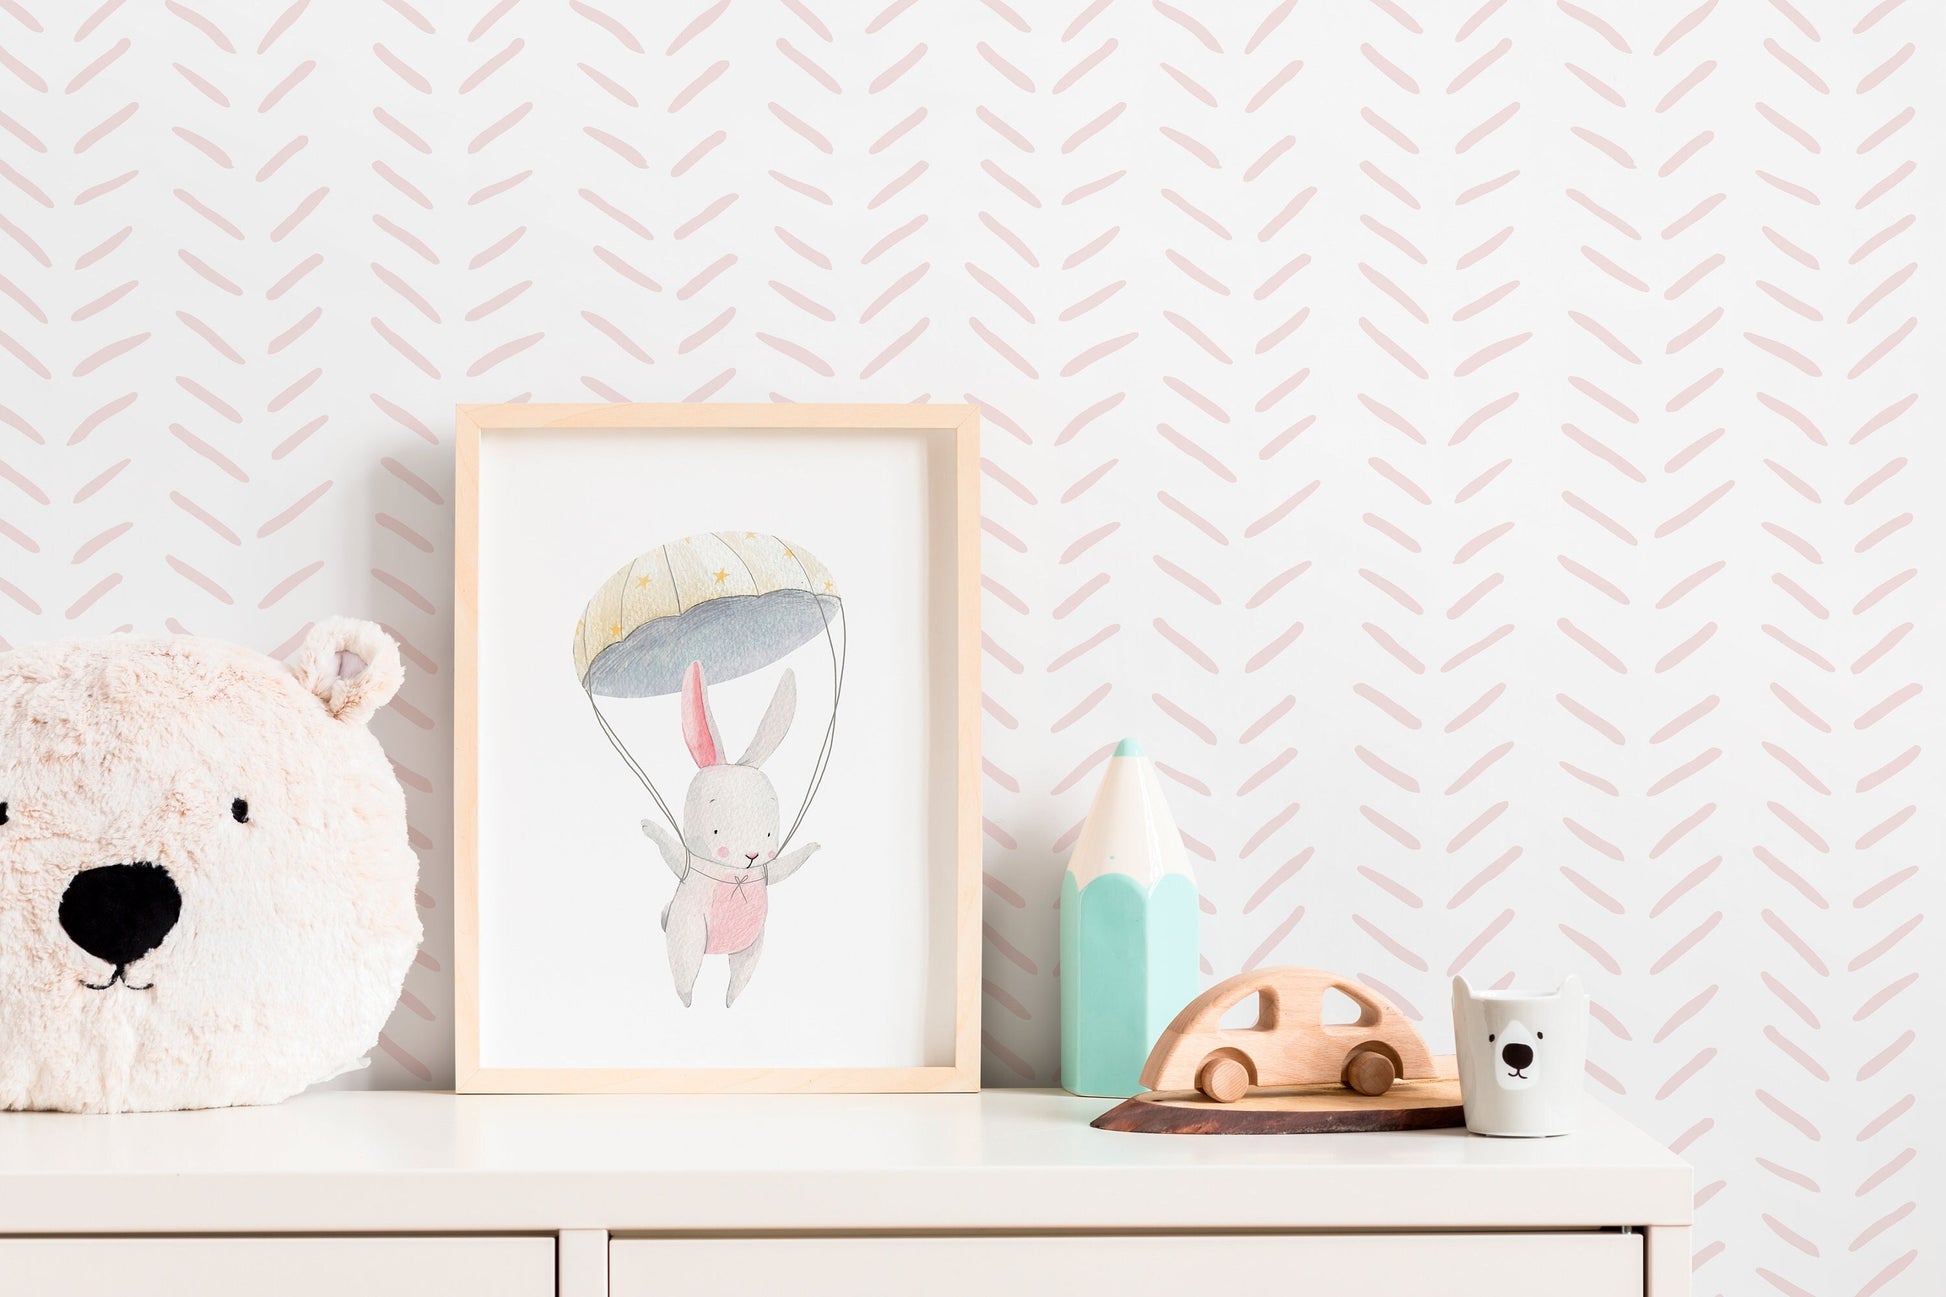 Boho Herringbone in Soft Pink Wallpaper Removable and Repositionable Peel and Stick or Traditional Pre-pasted Wallpaper - ZACI